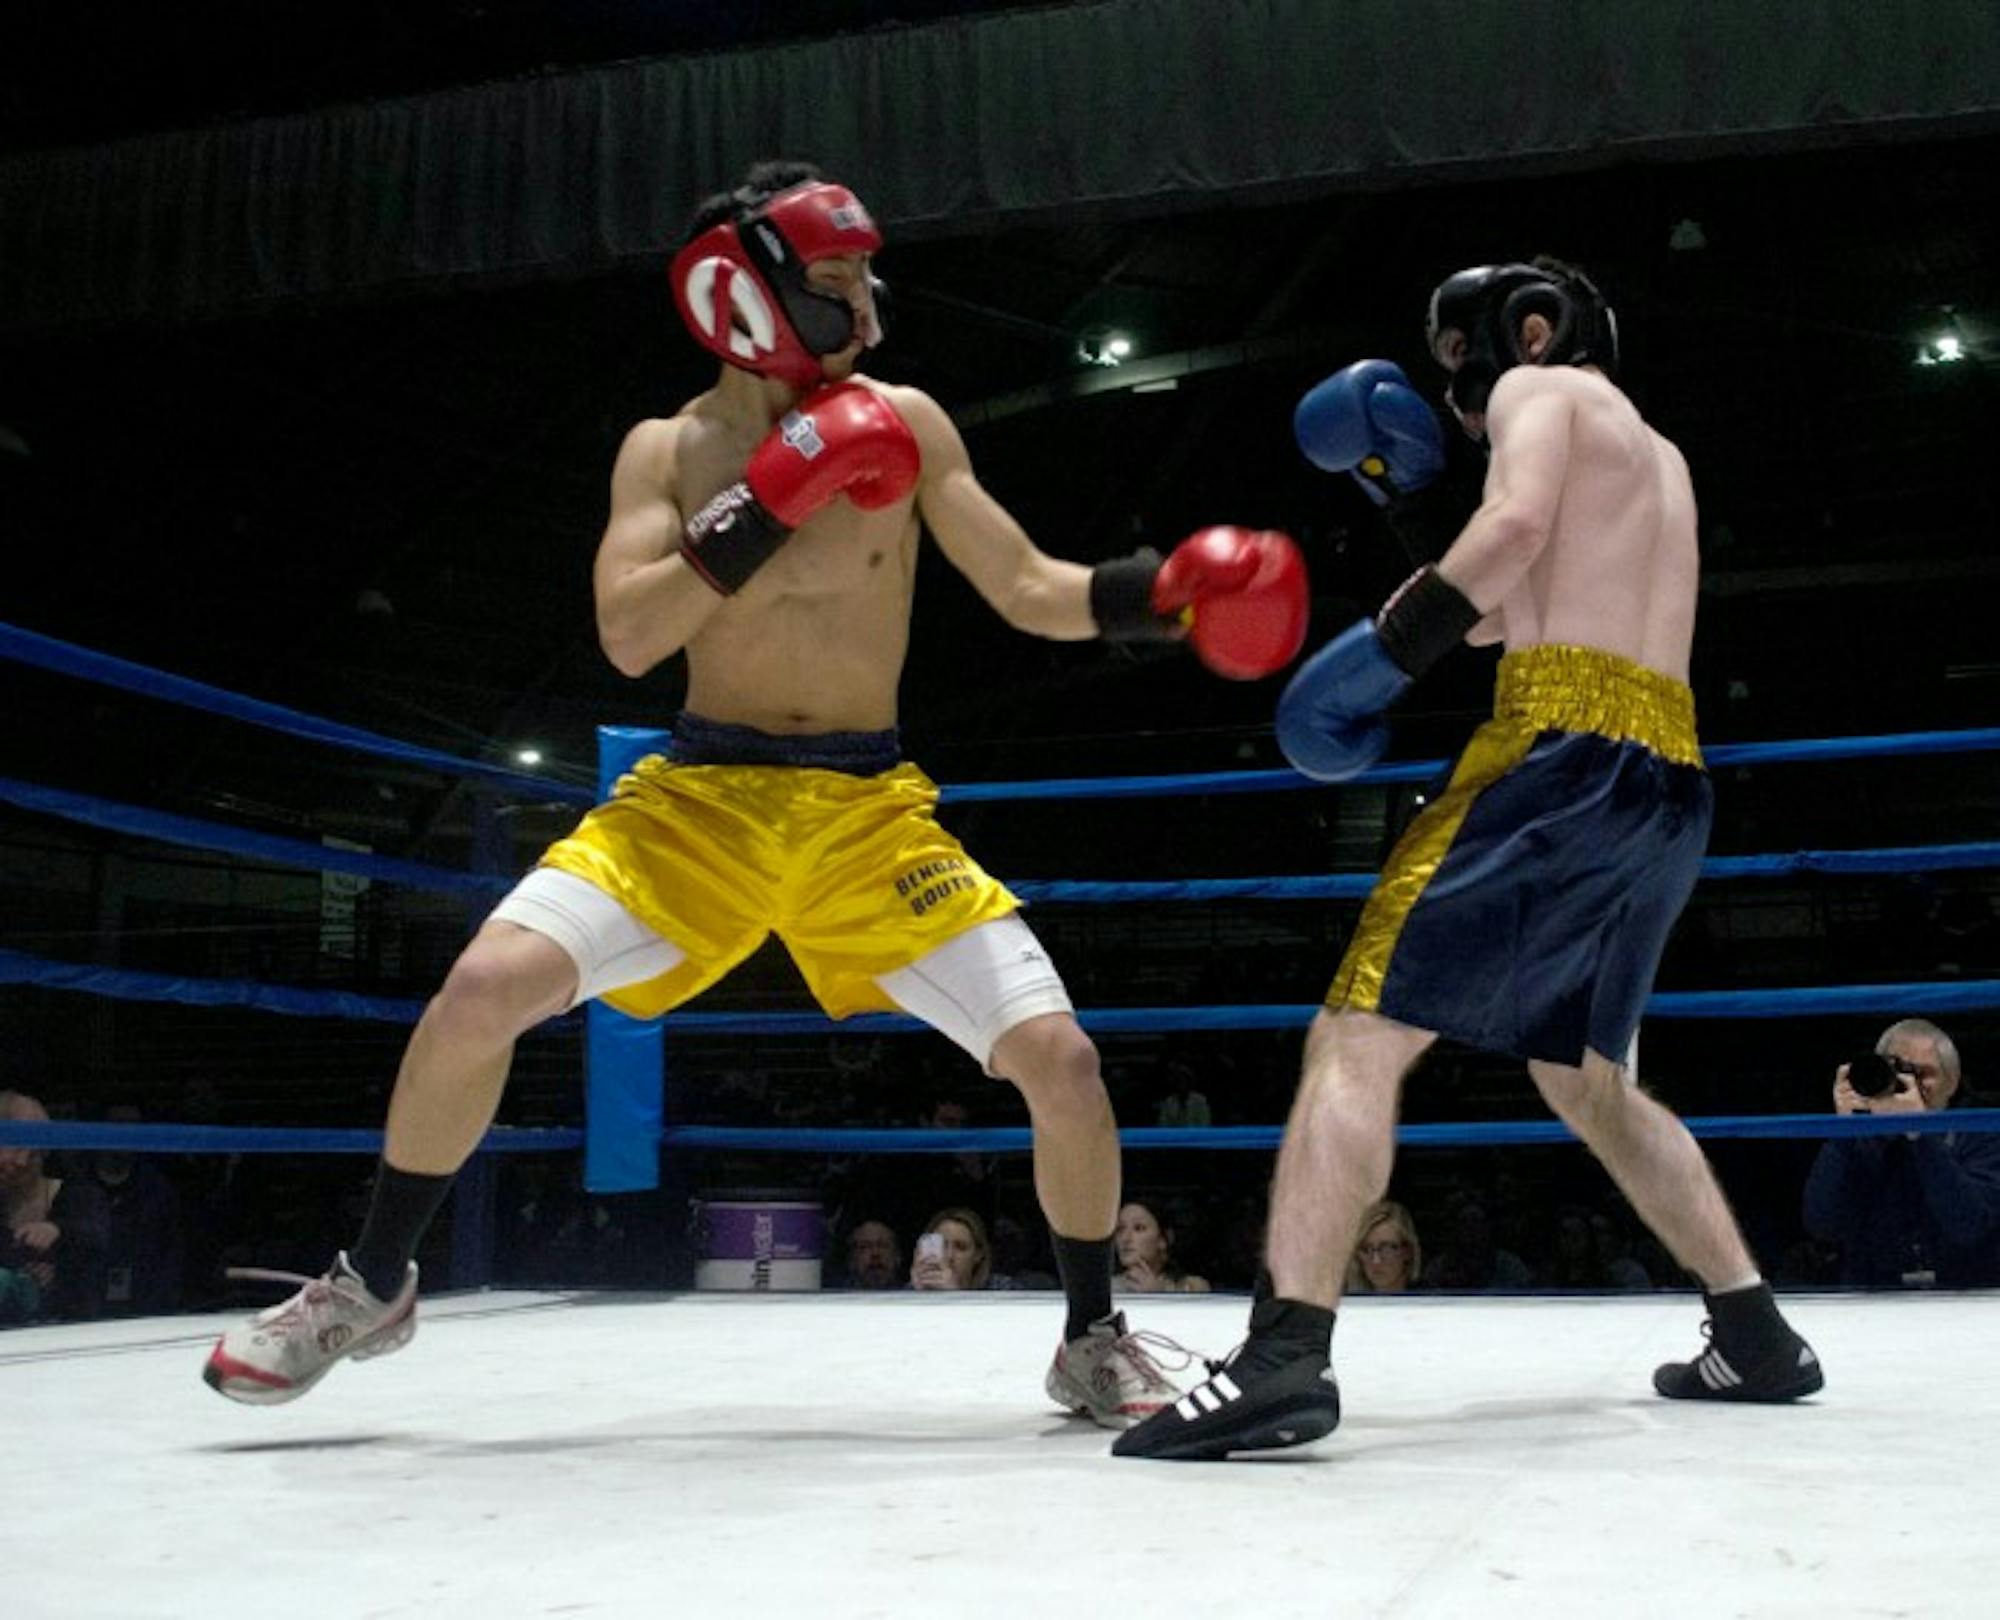 Andy Faustone (right) fights Jeffrey Wang in a round during last year’s Bengal Bouts. The Bouts  benefit Holy Cross missions in Bangladesh.